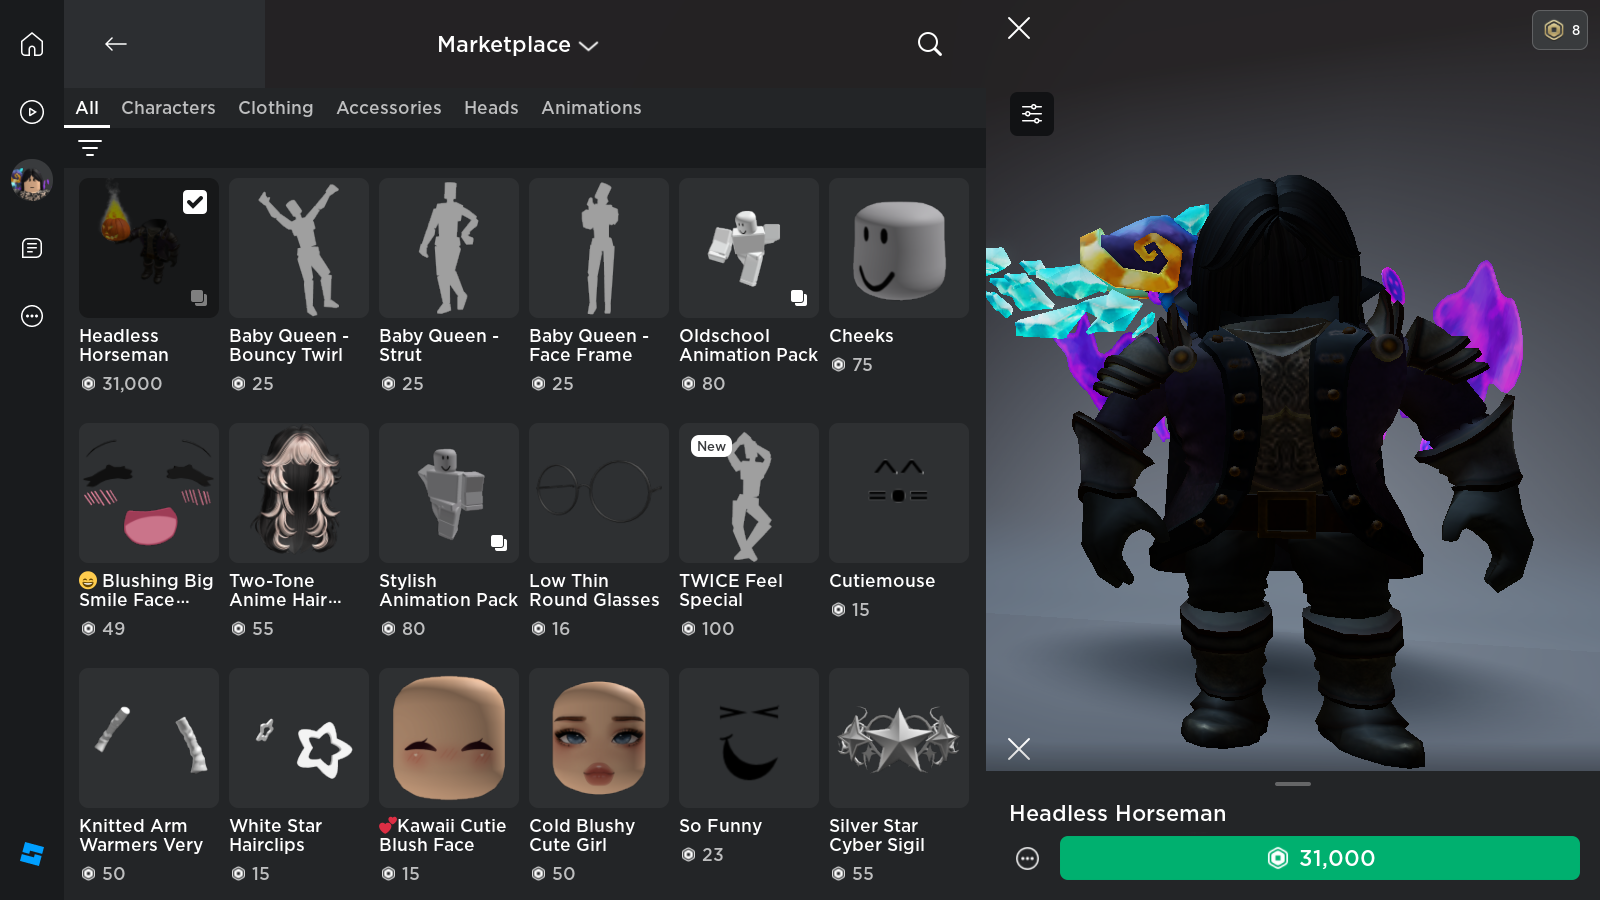 Headless Roblox Account Has accessories (CONTACT BEFORE PURCHASE